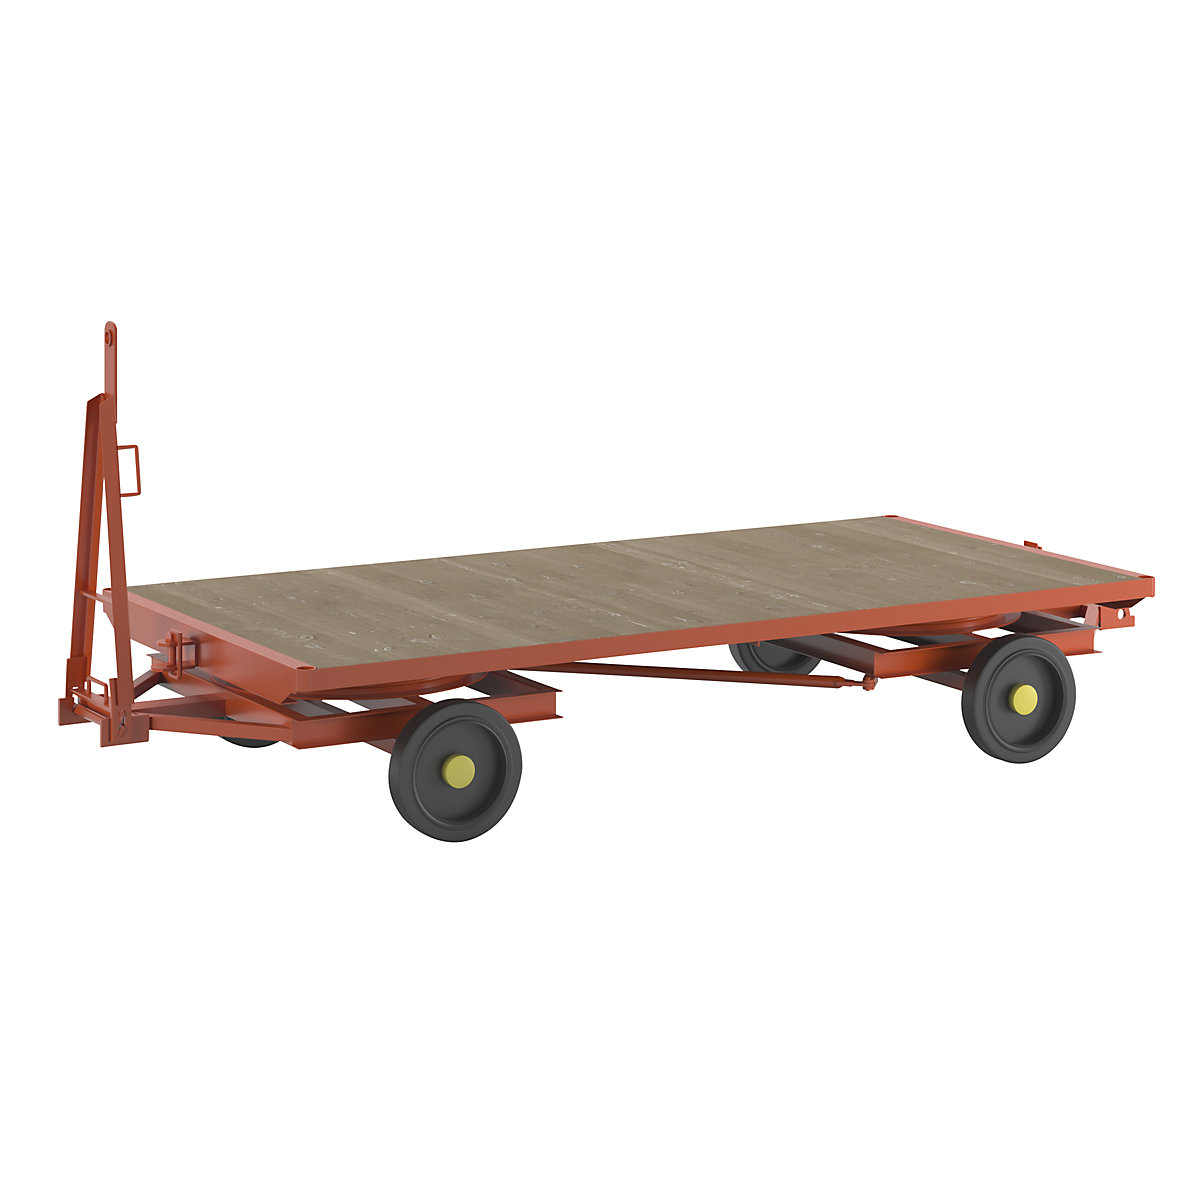 Trailer, 4-wheel double turntable steering, max. load 3 t, platform 3.0 x 1.5 m, solid rubber tyres-16